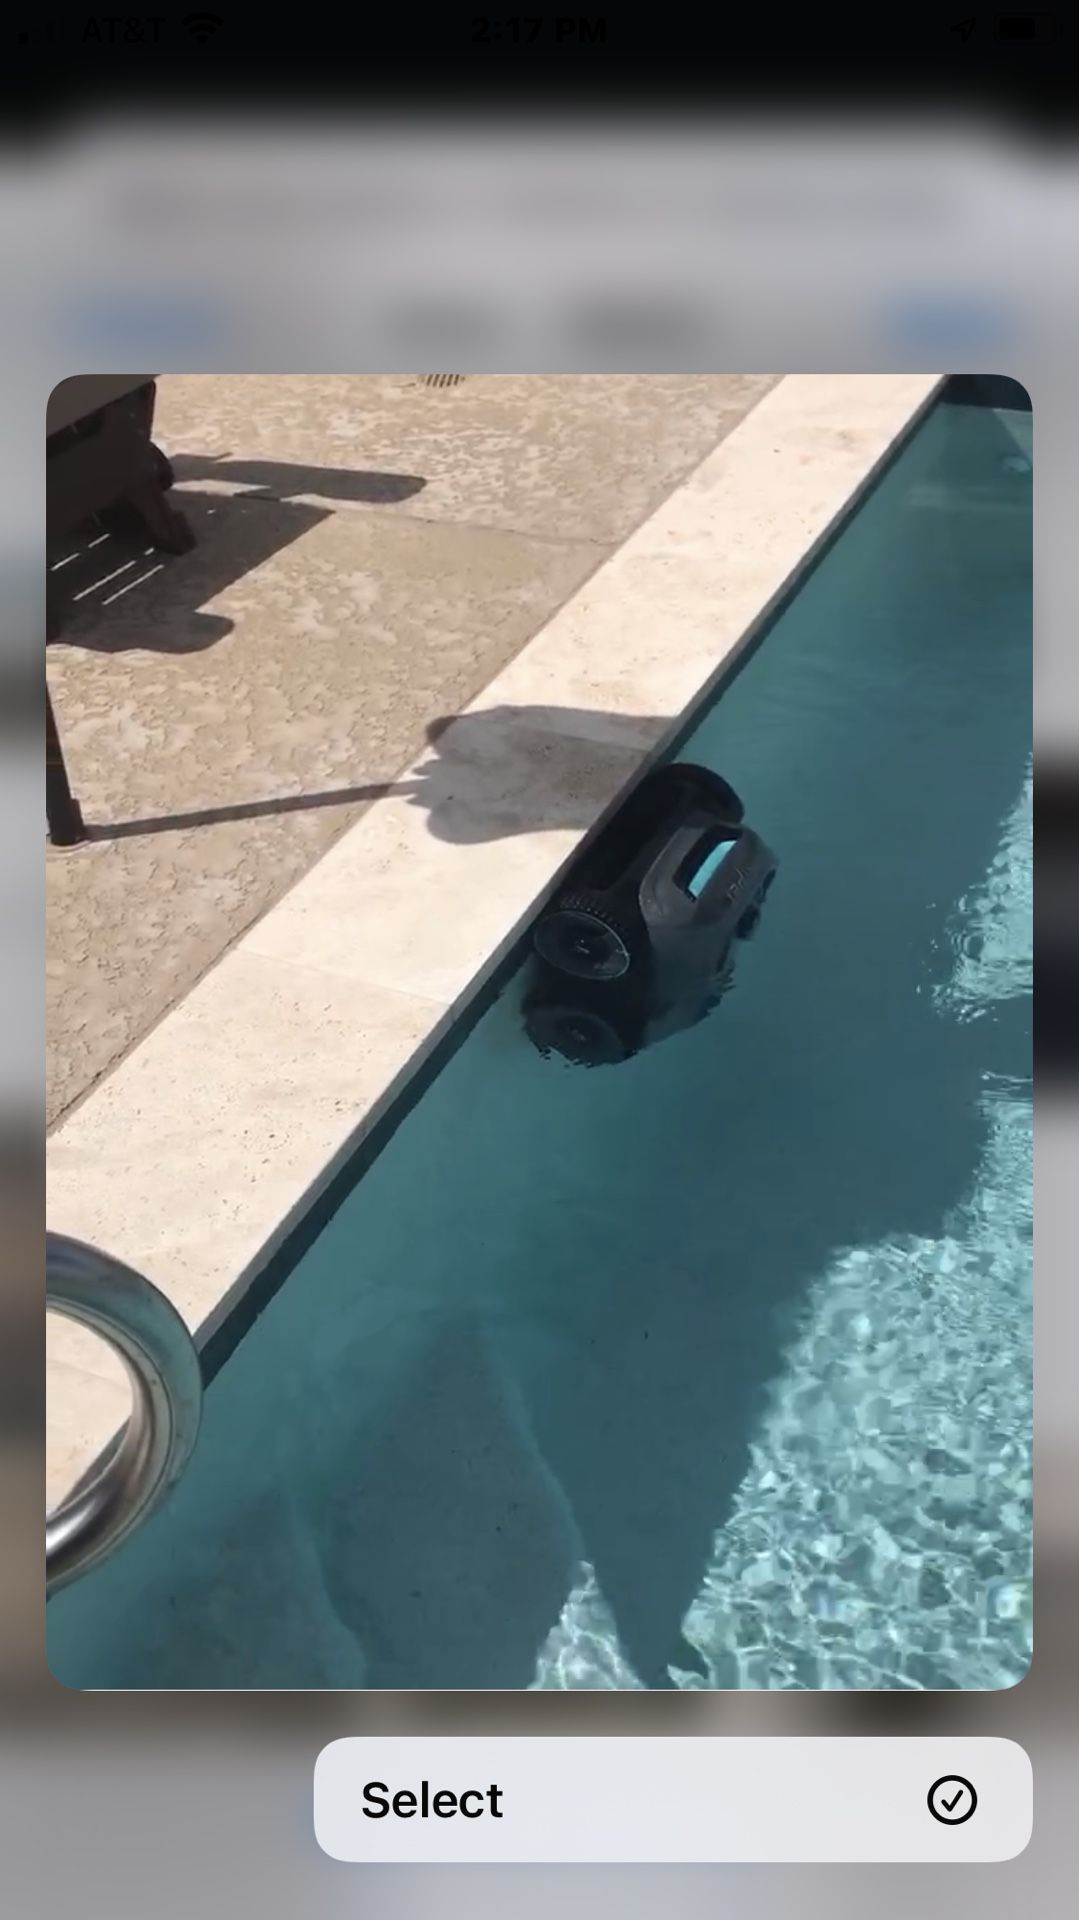 Pool Cleaner Robotic Cordless